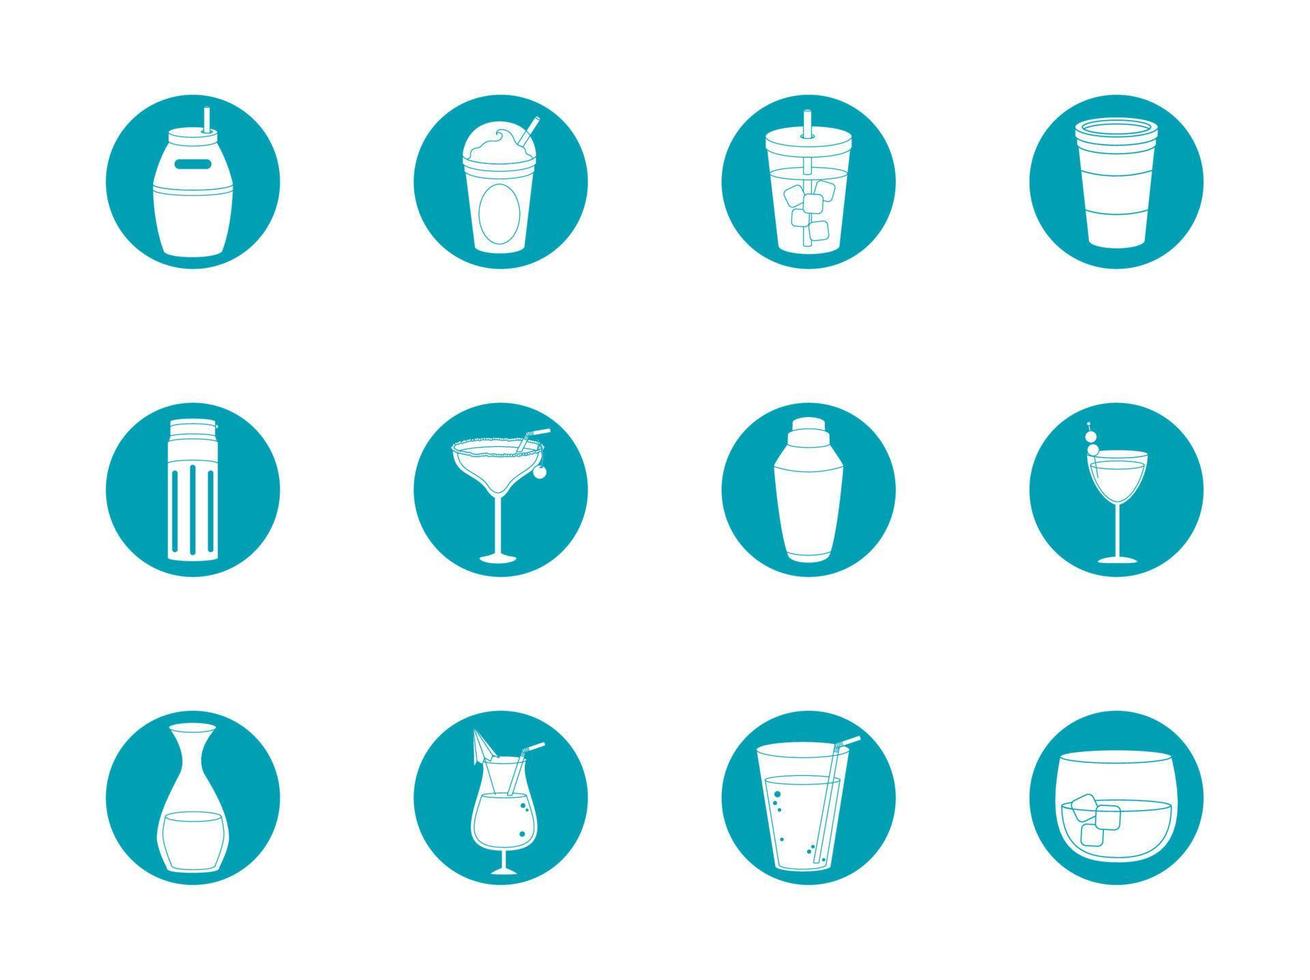 drinks beverage glass cups bottle alcoholic liquor icons set blue block style icon vector